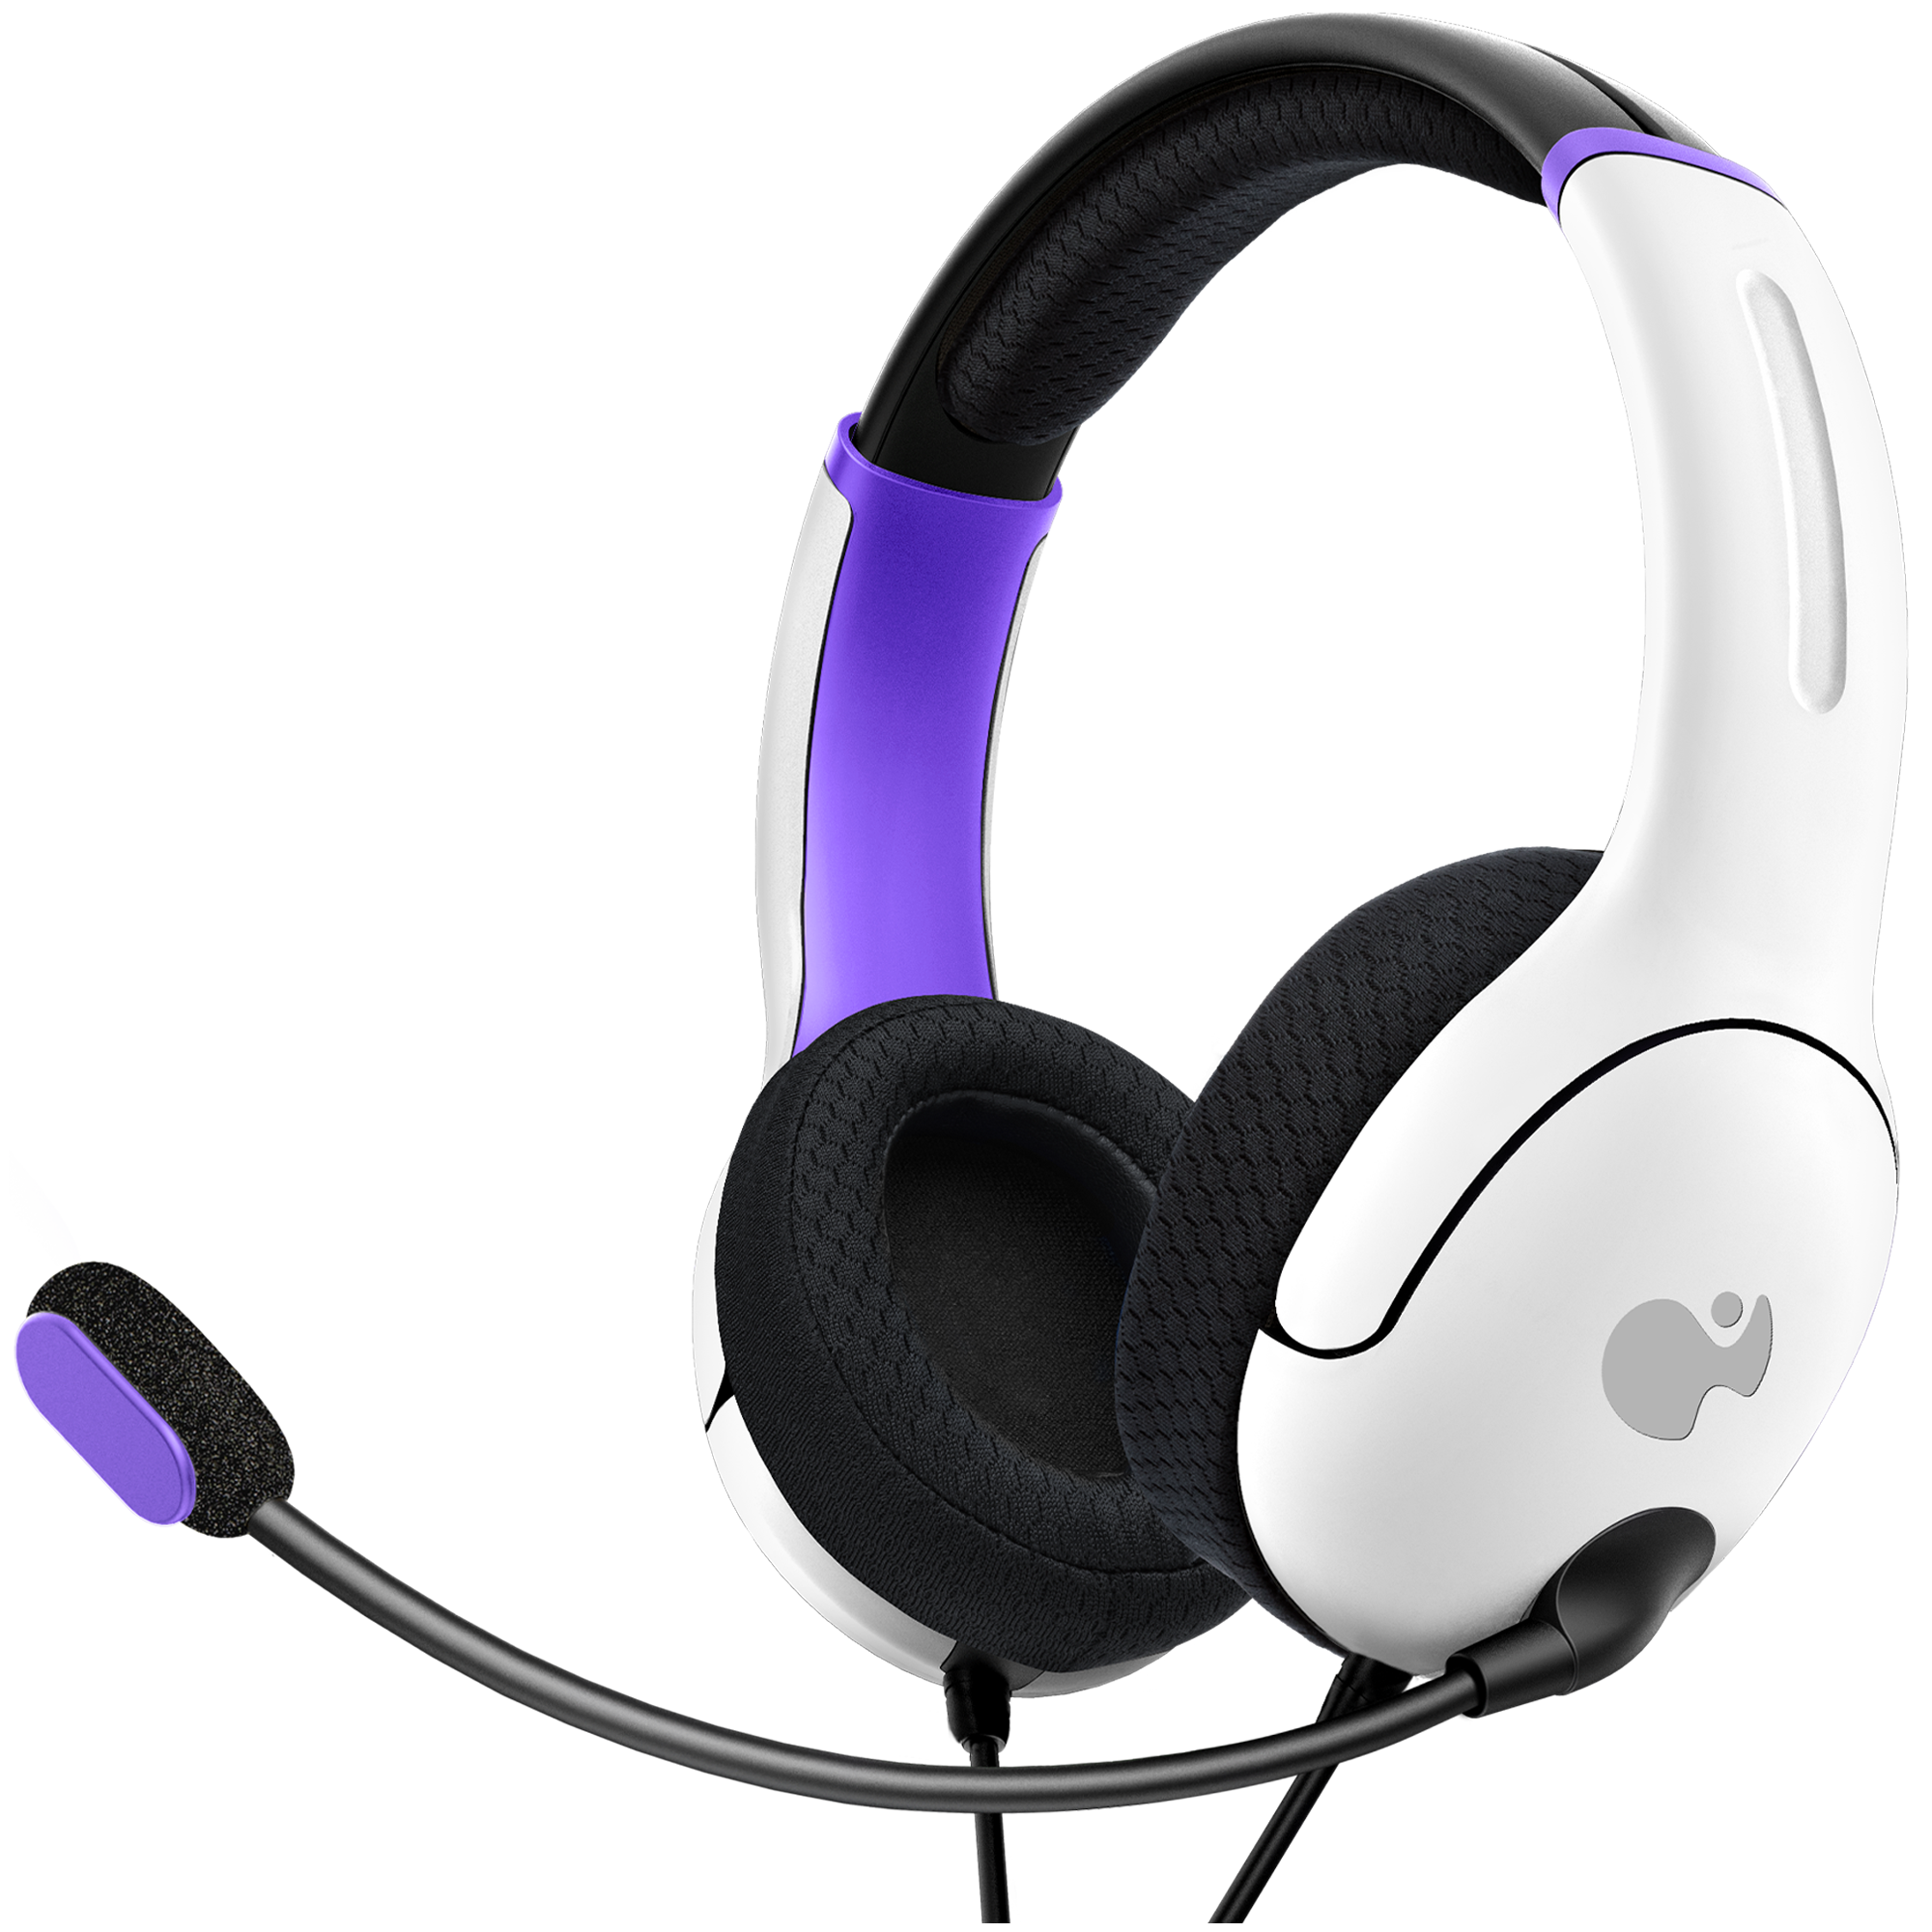 Xbox Series XS & PC Purple Fade AIRLITE PRO WIRELESS Headset by PDP